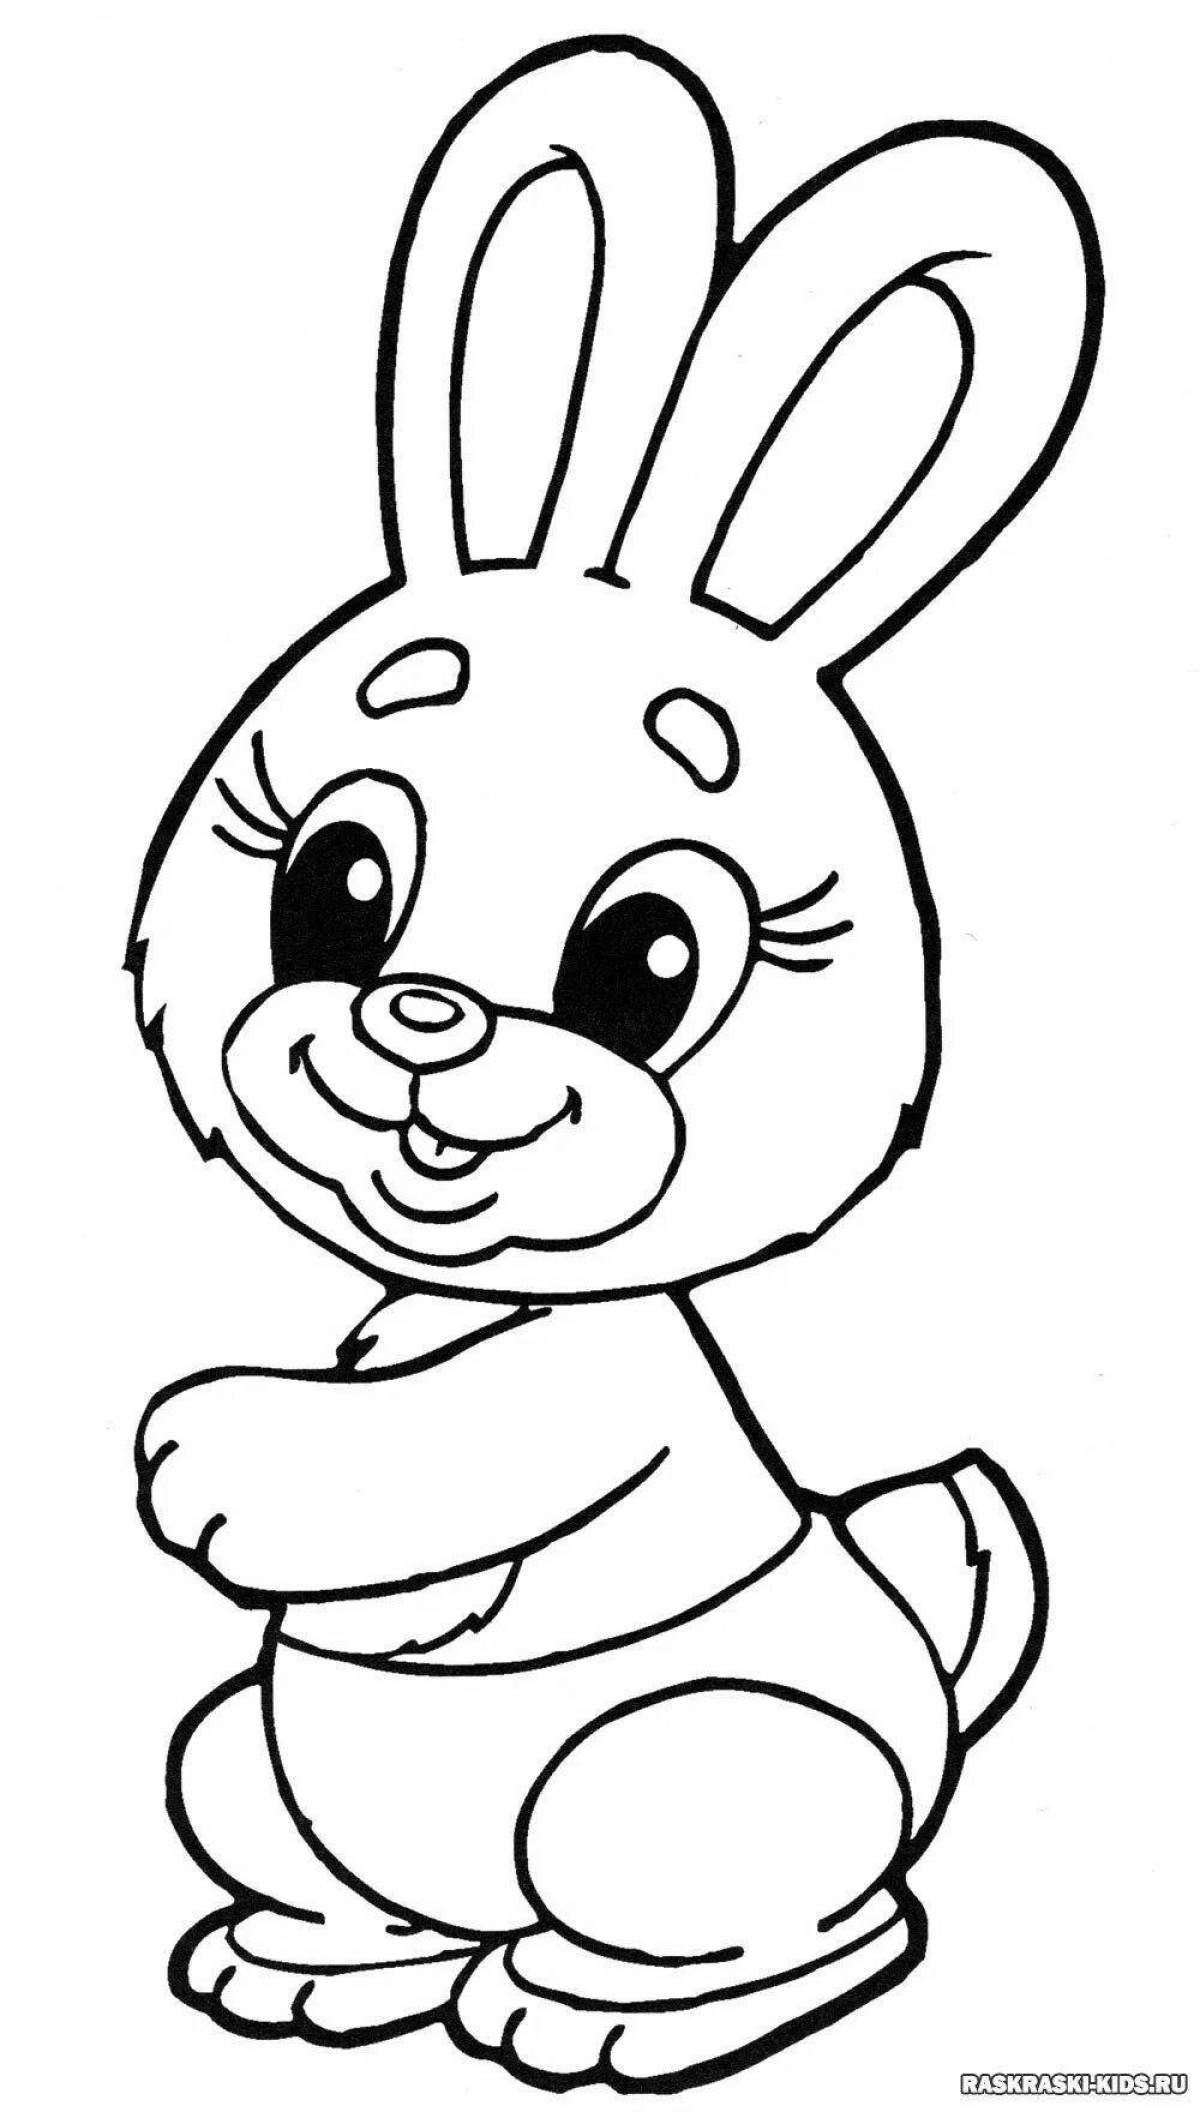 Hugging rabbit coloring book for 2-3 year olds